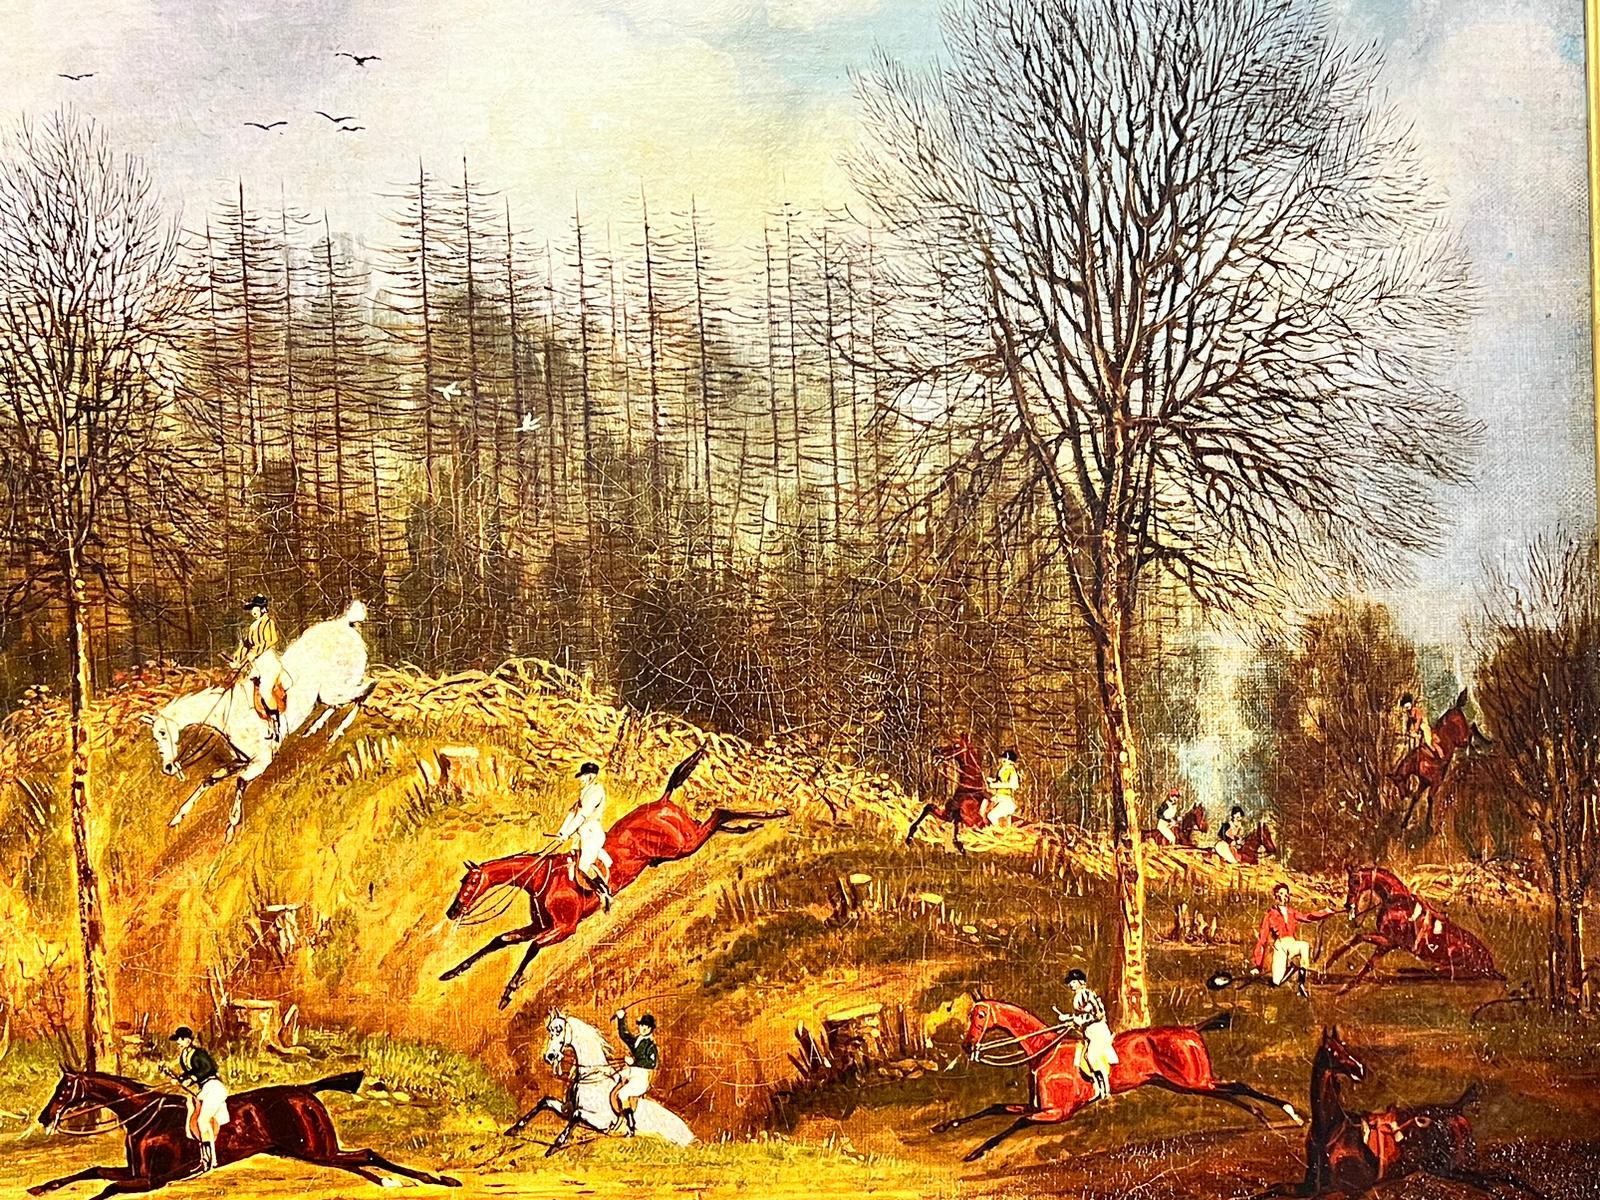 The Great St. Albans Steeplechase
after James Pollard
titled to label verso
color print on canvas, framed
canvas: 25.5 x 37 inches
framed: 31 x 41 inches
the painting is in overall very good and sound condition - has small signs of paint loss and